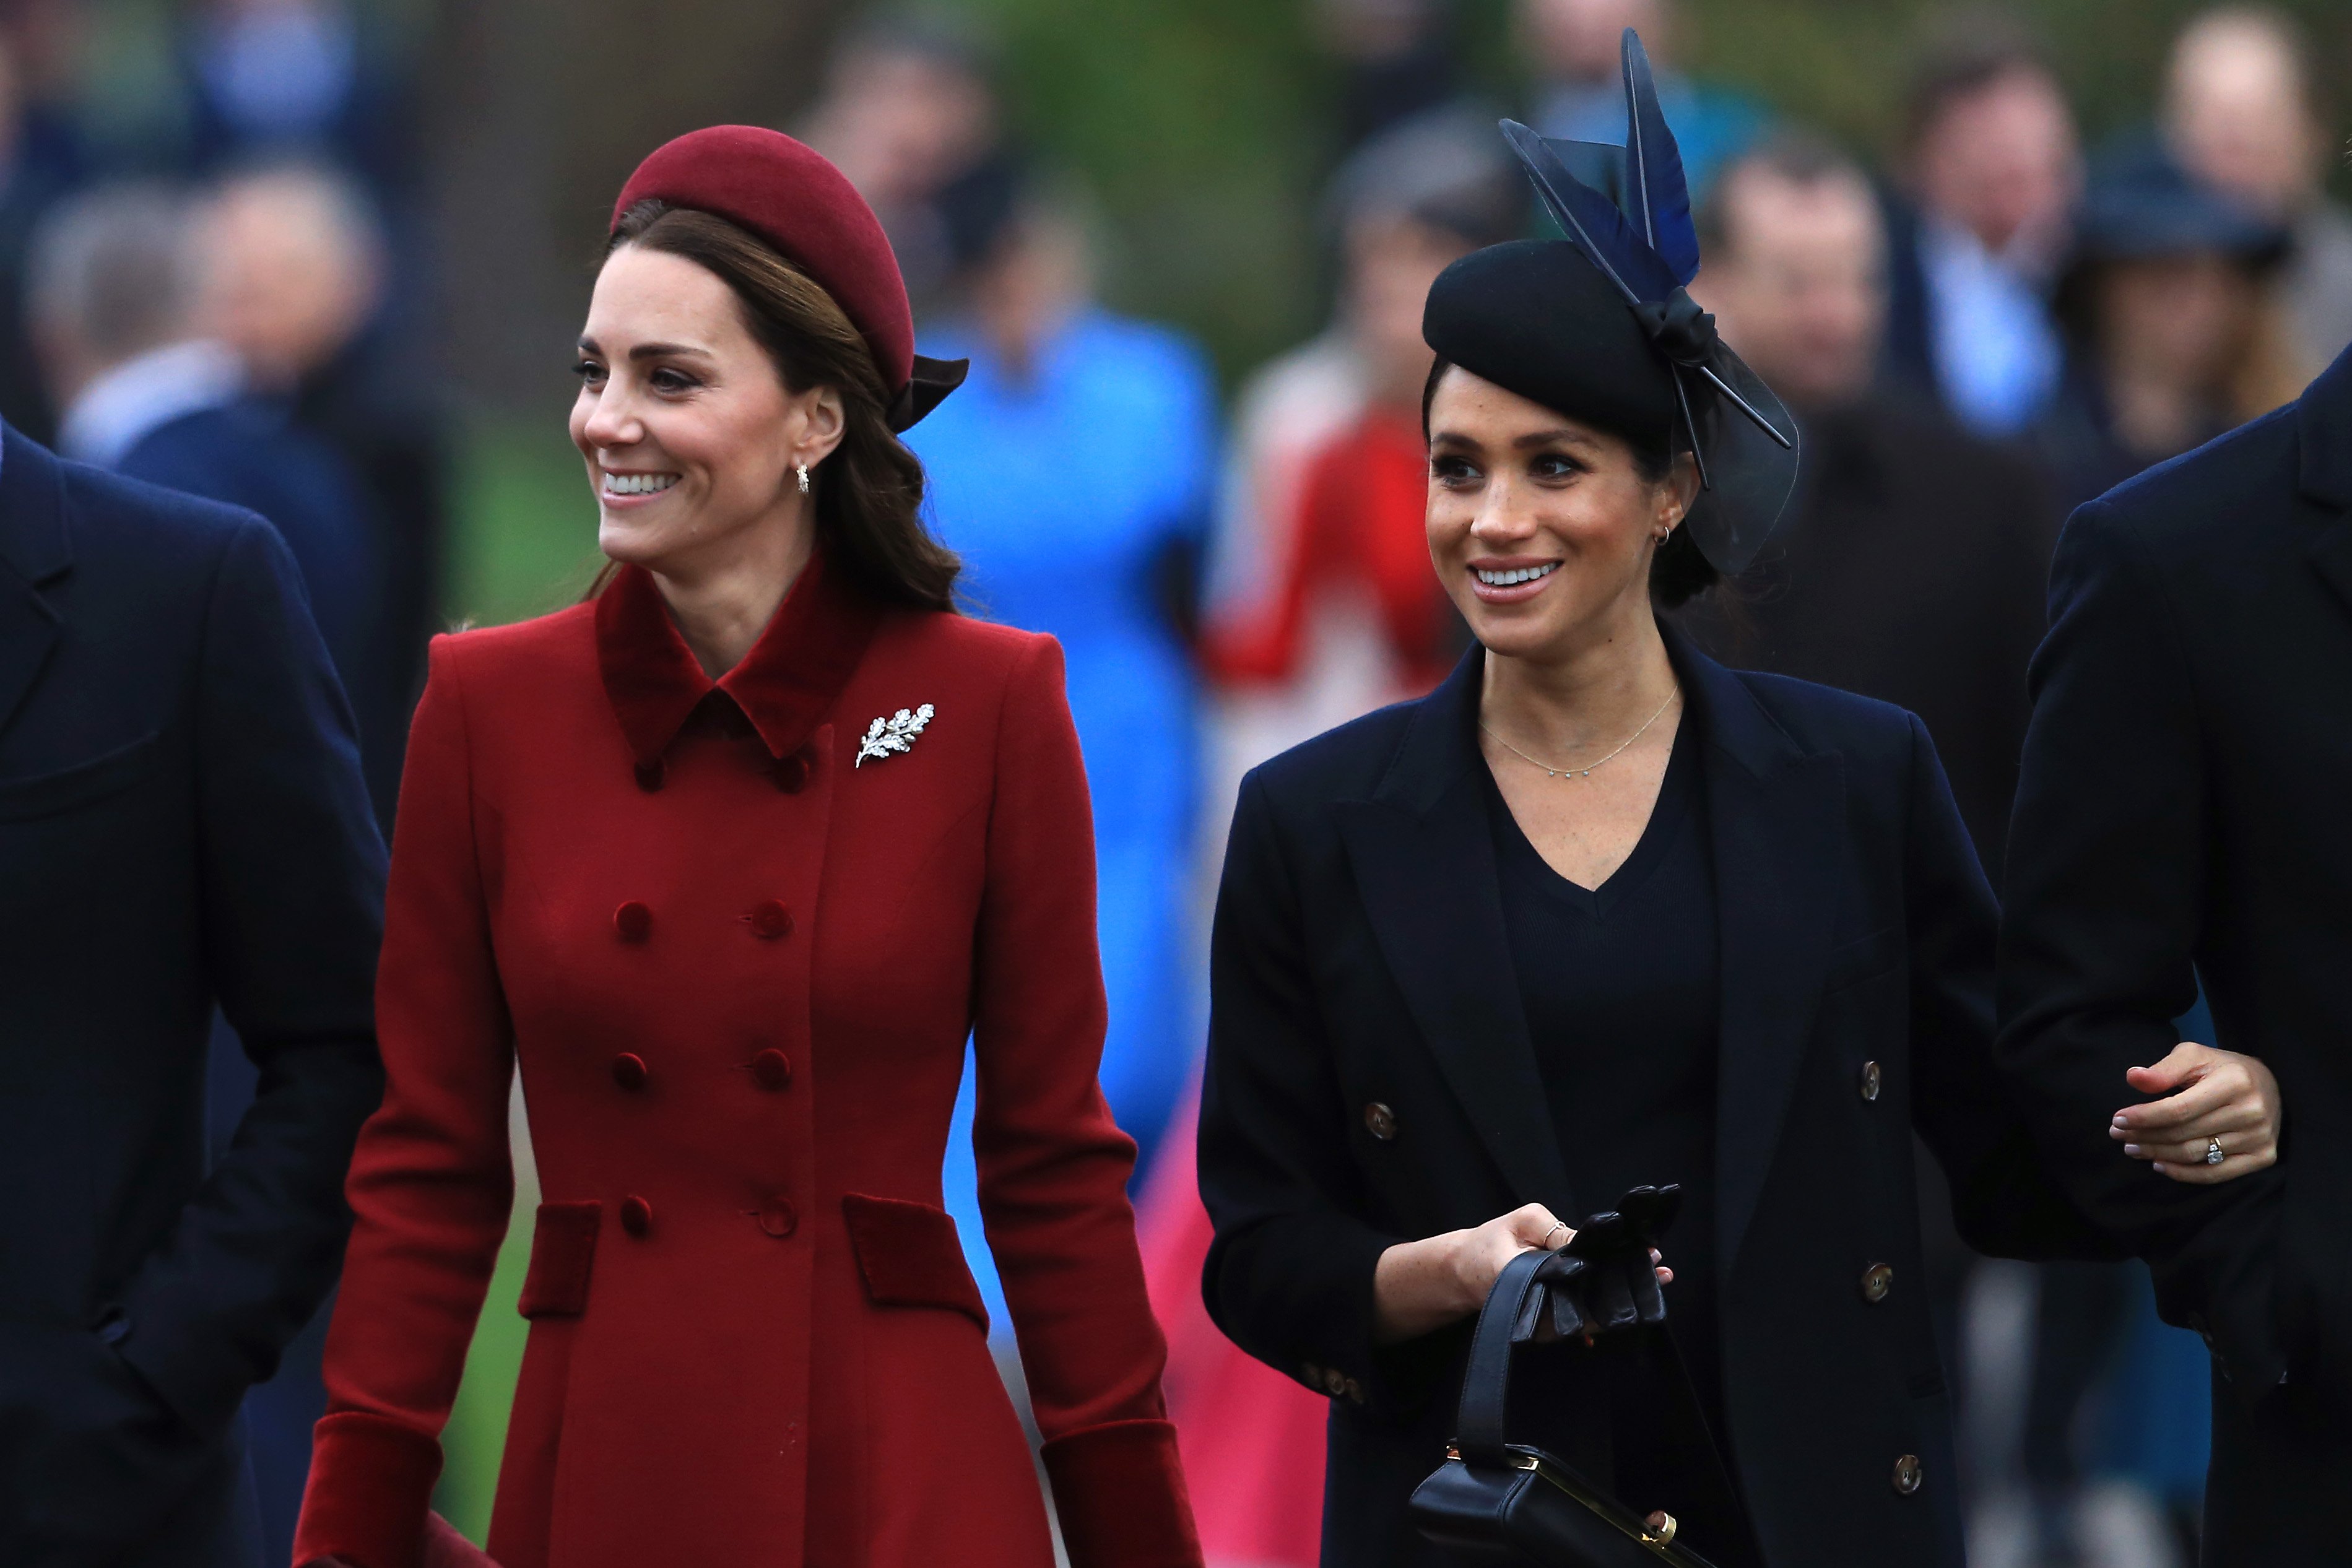 Catherine, Duchess of Cambridge and Meghan, Duchess of Sussex walking togather